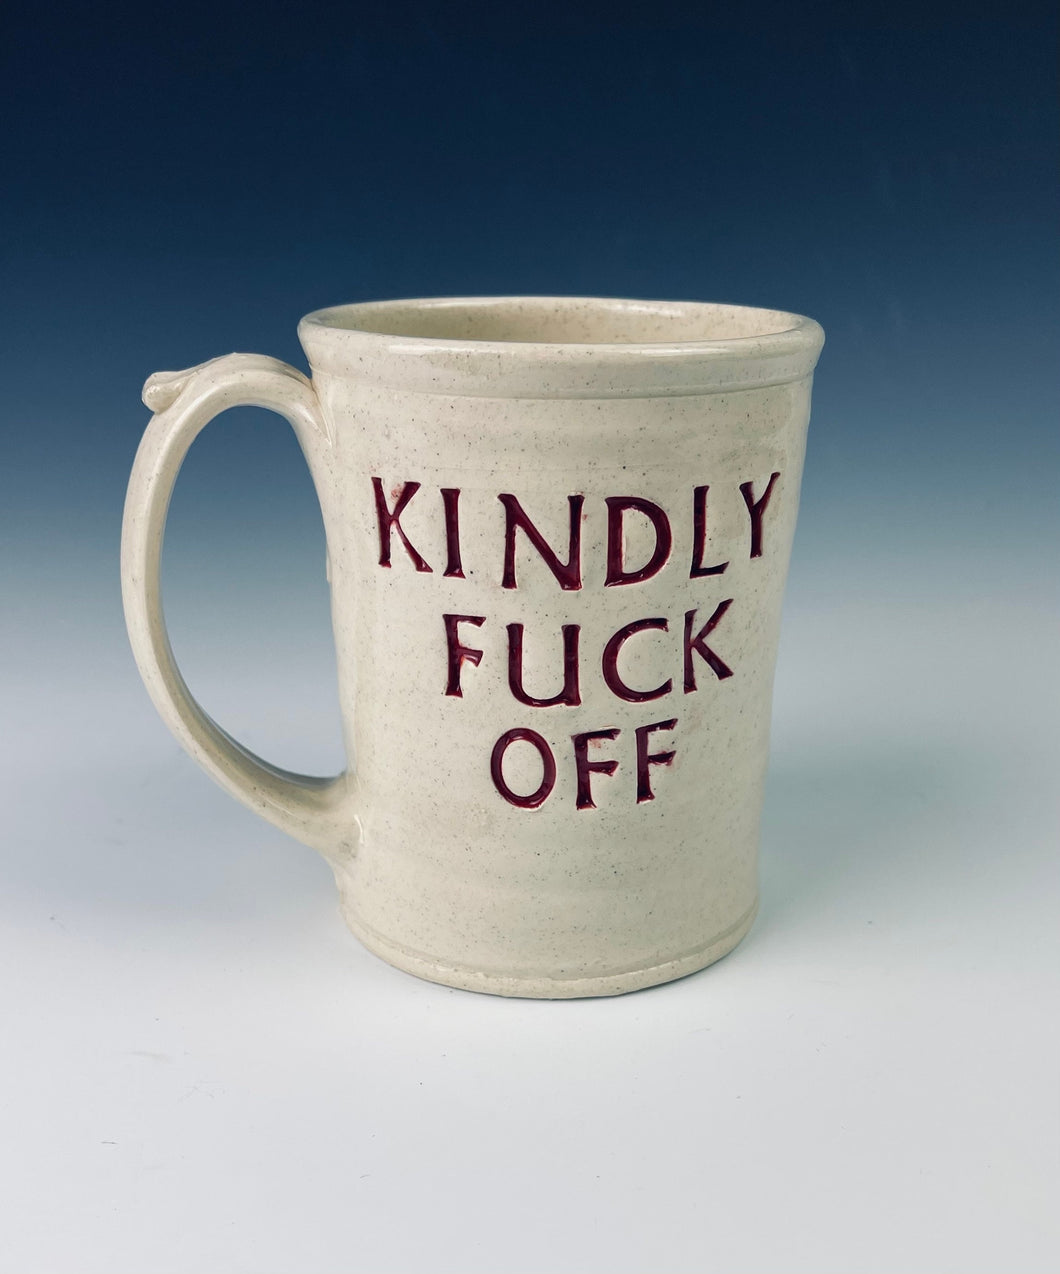 16oz Kindly Fuck off Mug. passive aggressive? but need to get your point across?